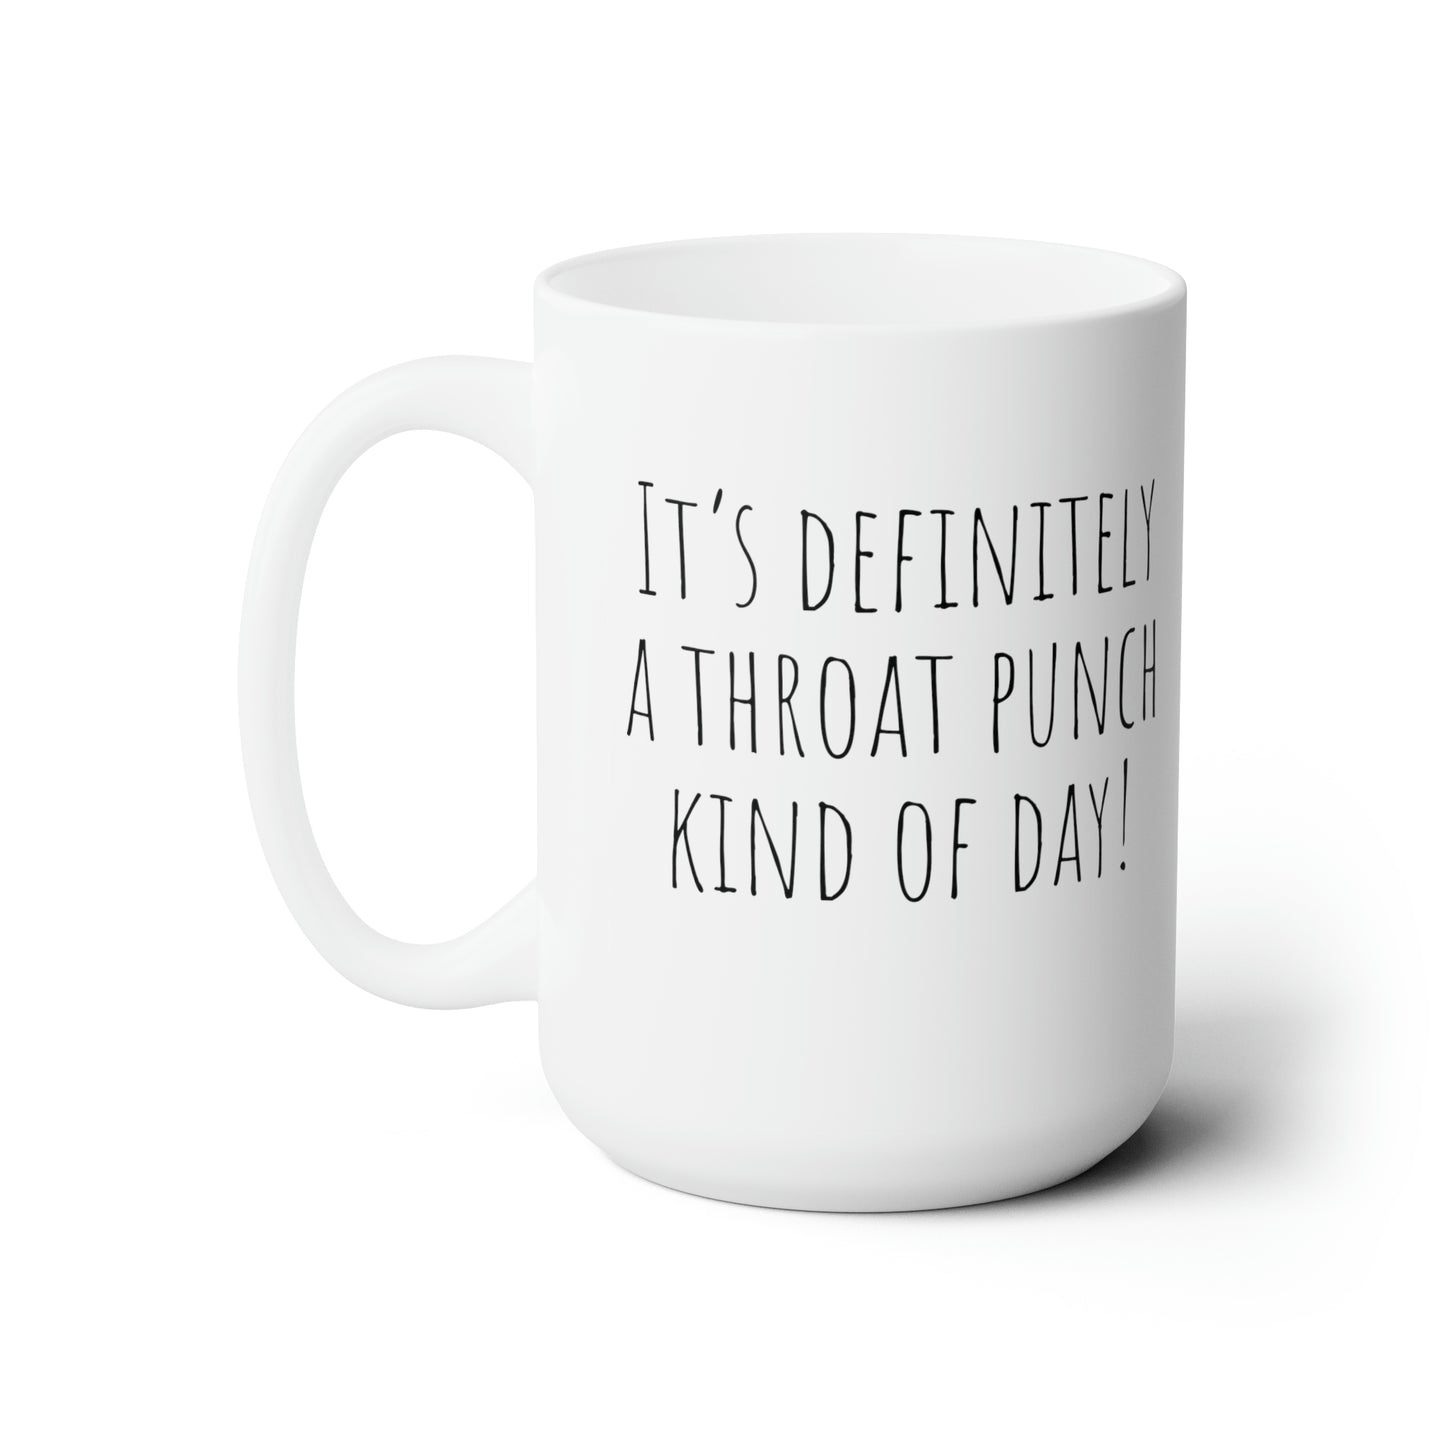 Sarcastic Coffee Mug For Throat Punch Hot Tea Cup For Grumpy Gift Idea